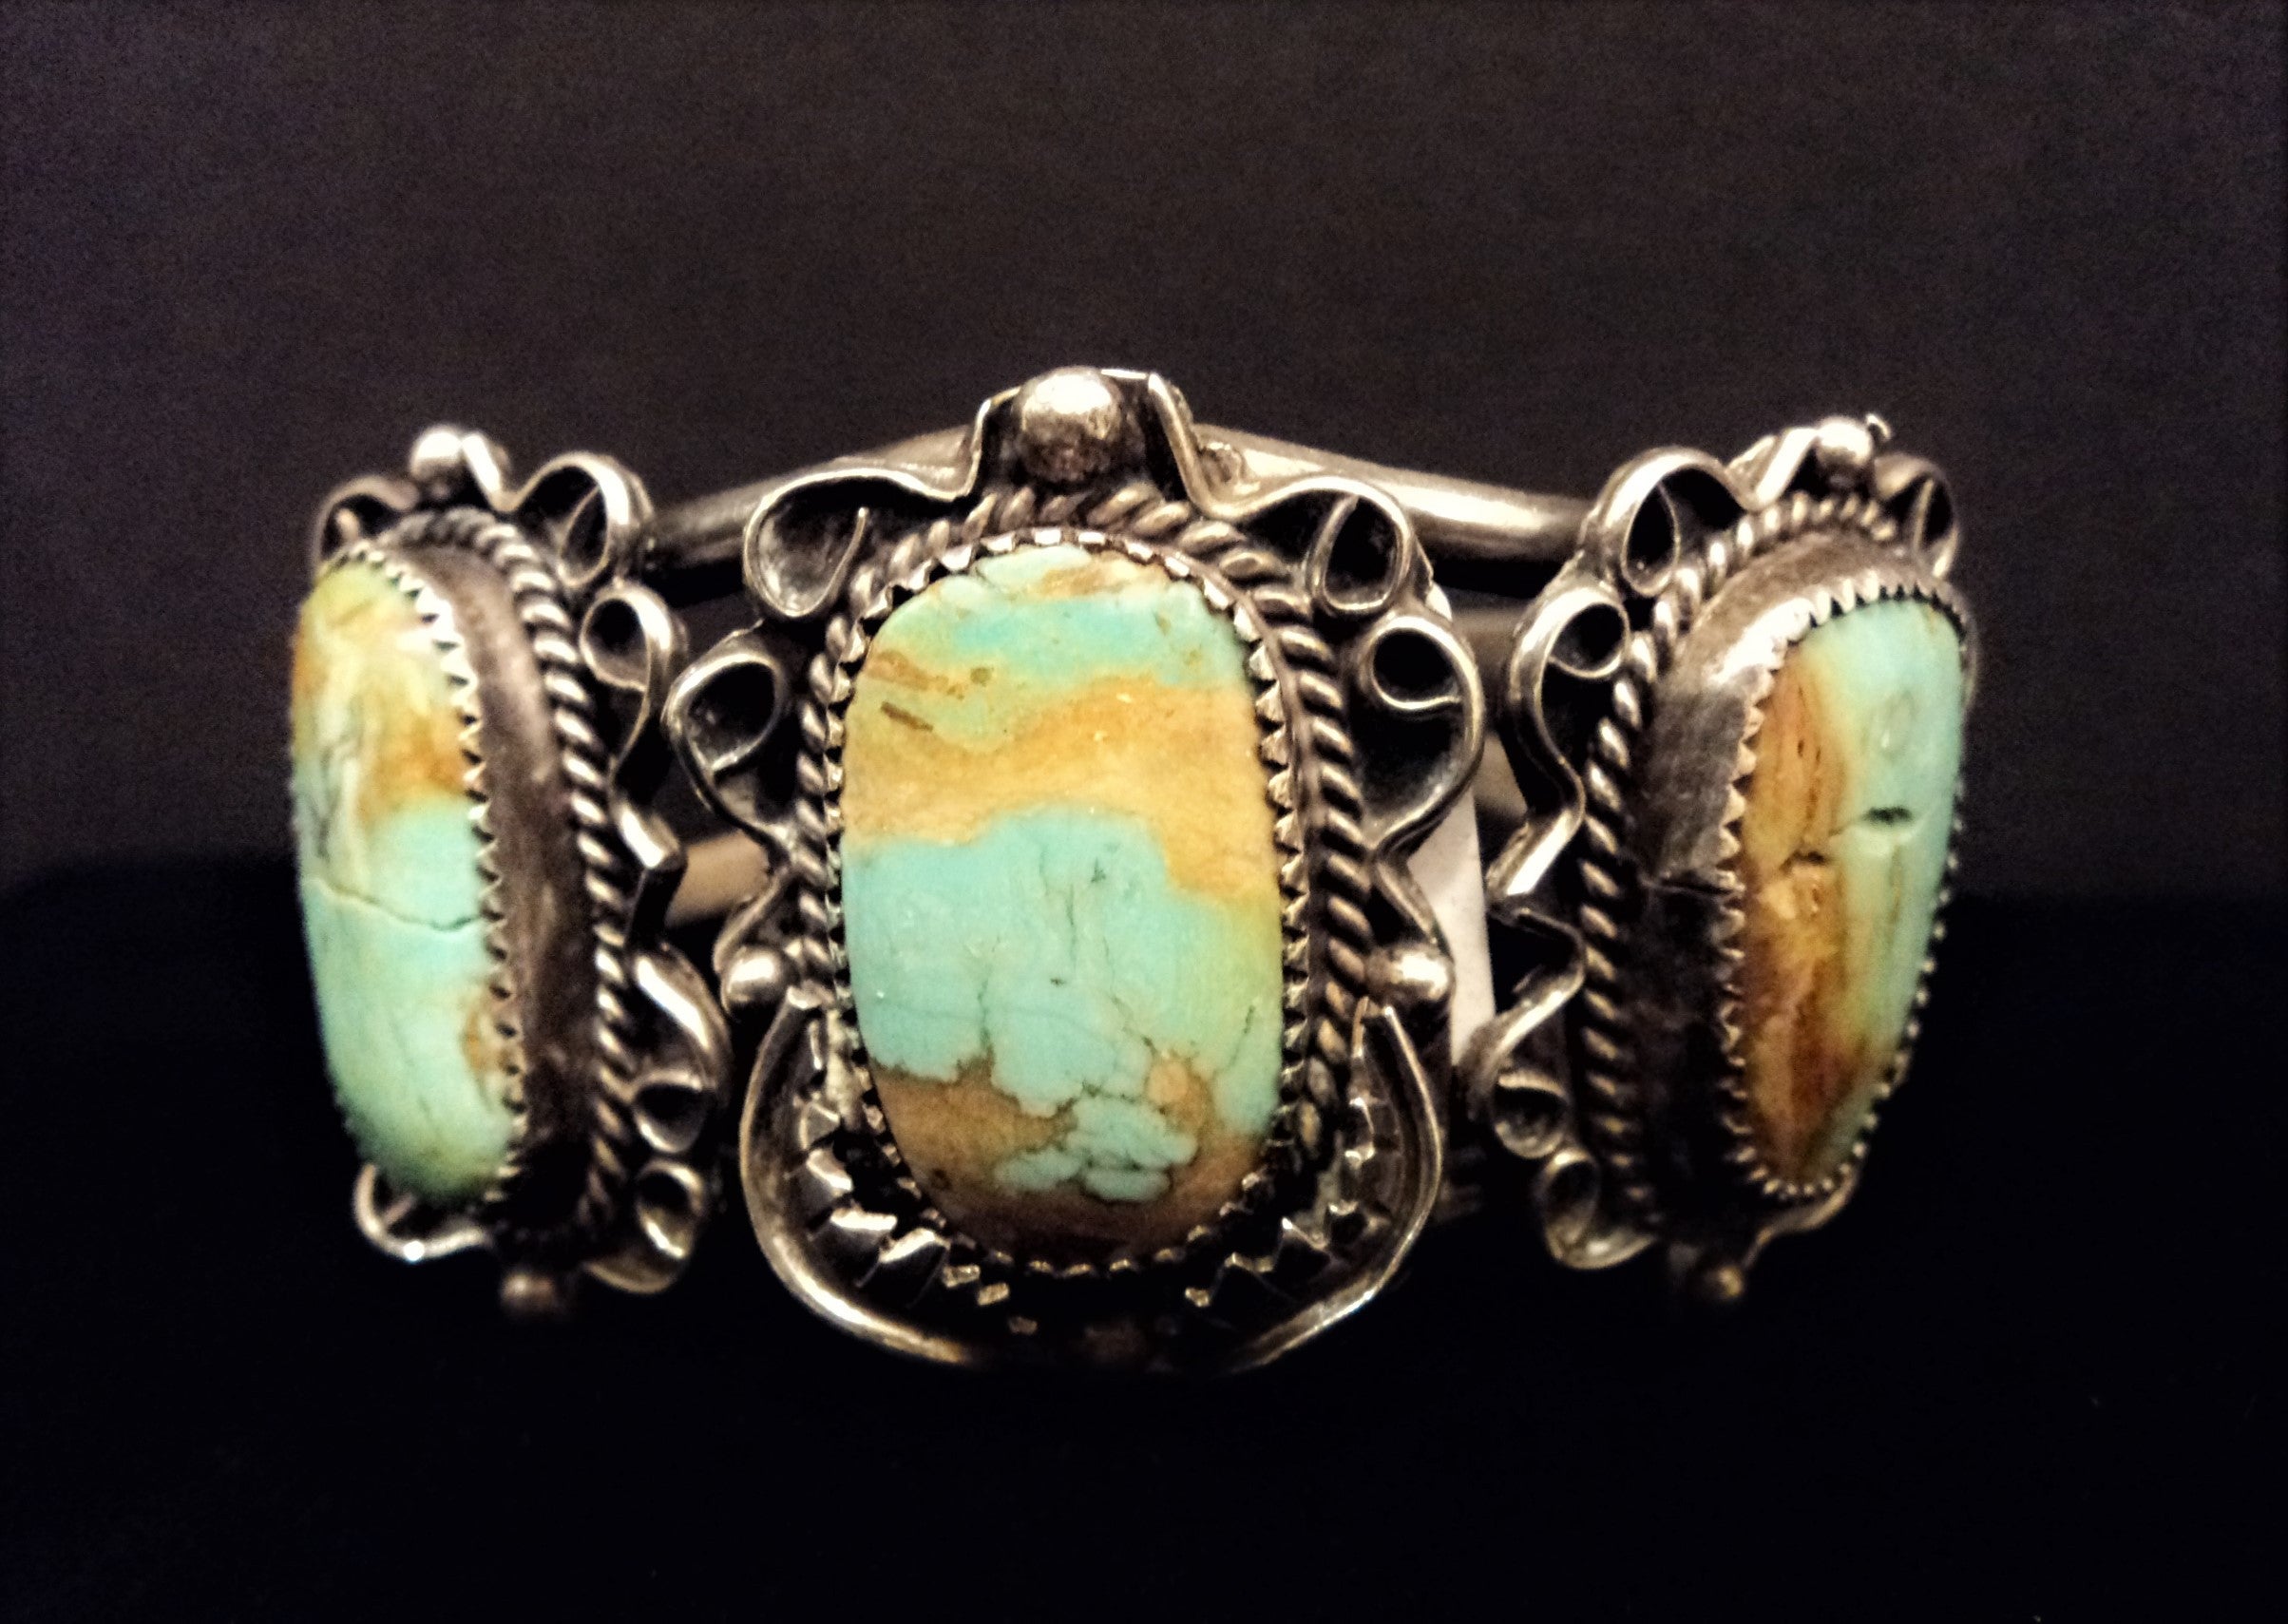 Native American Turquoise and Silver Cuff Bracelet